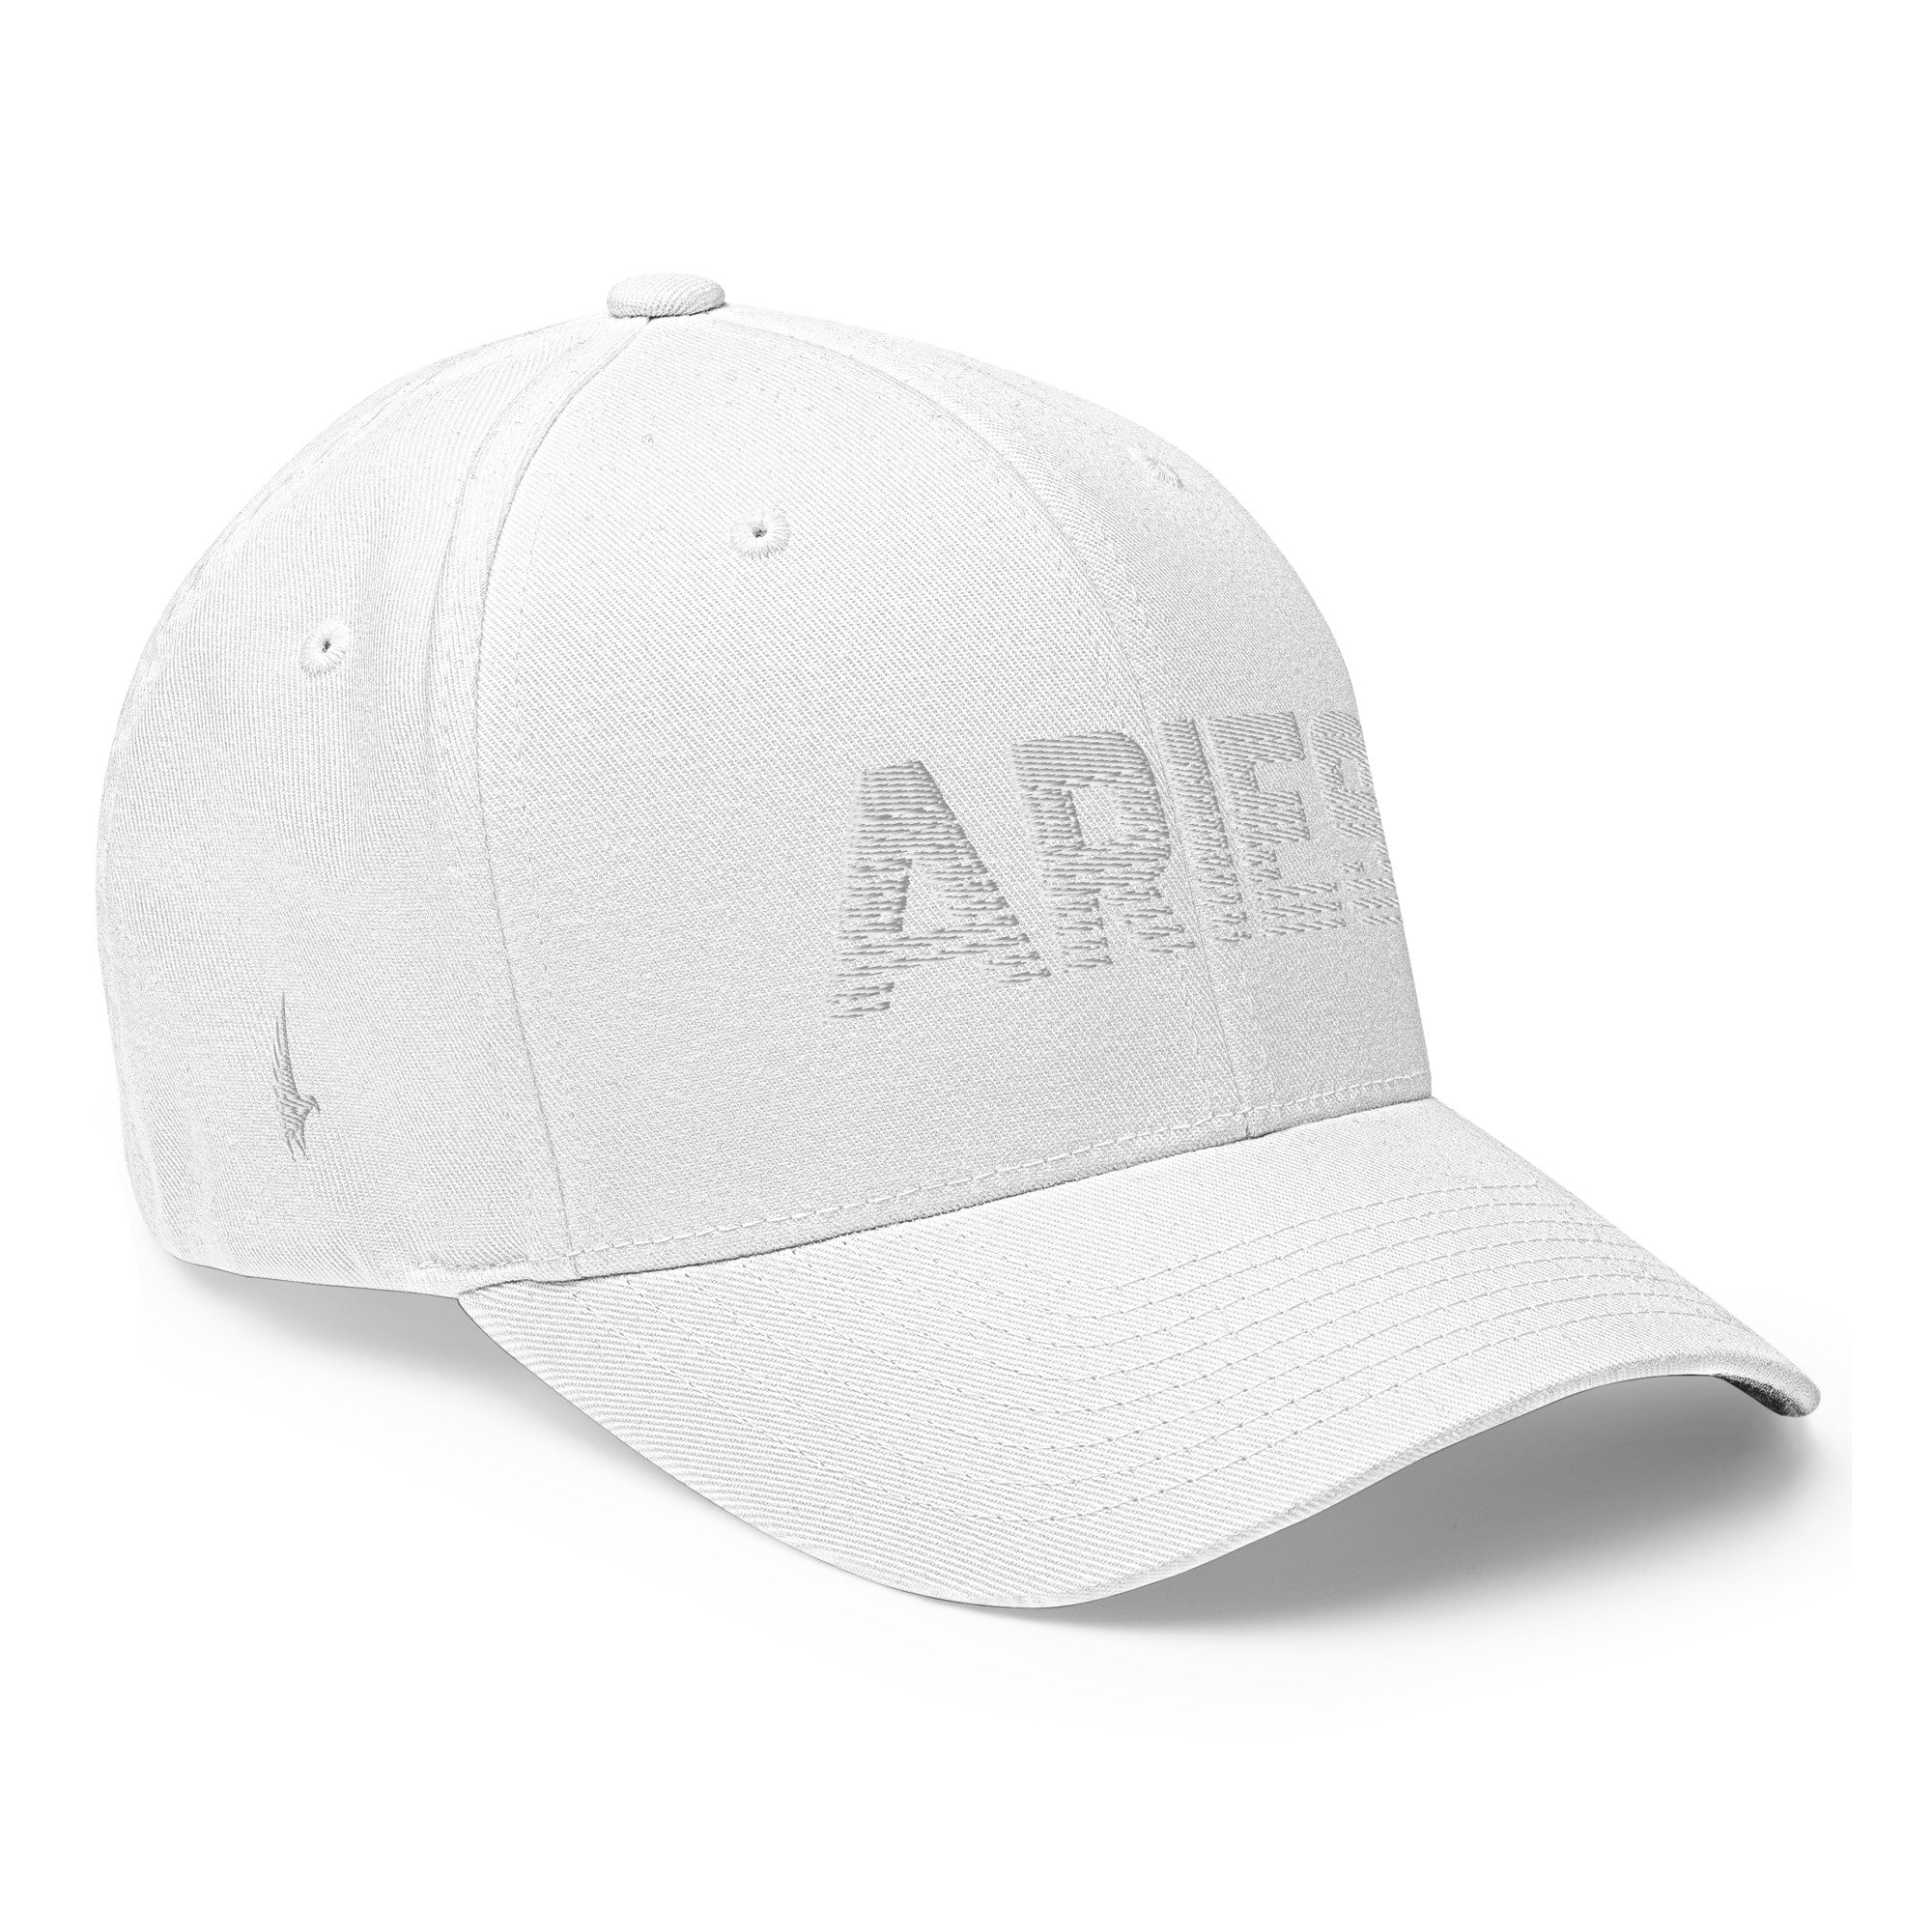 Aries Fitted Hat White/White Fitted - Loyalty Vibes